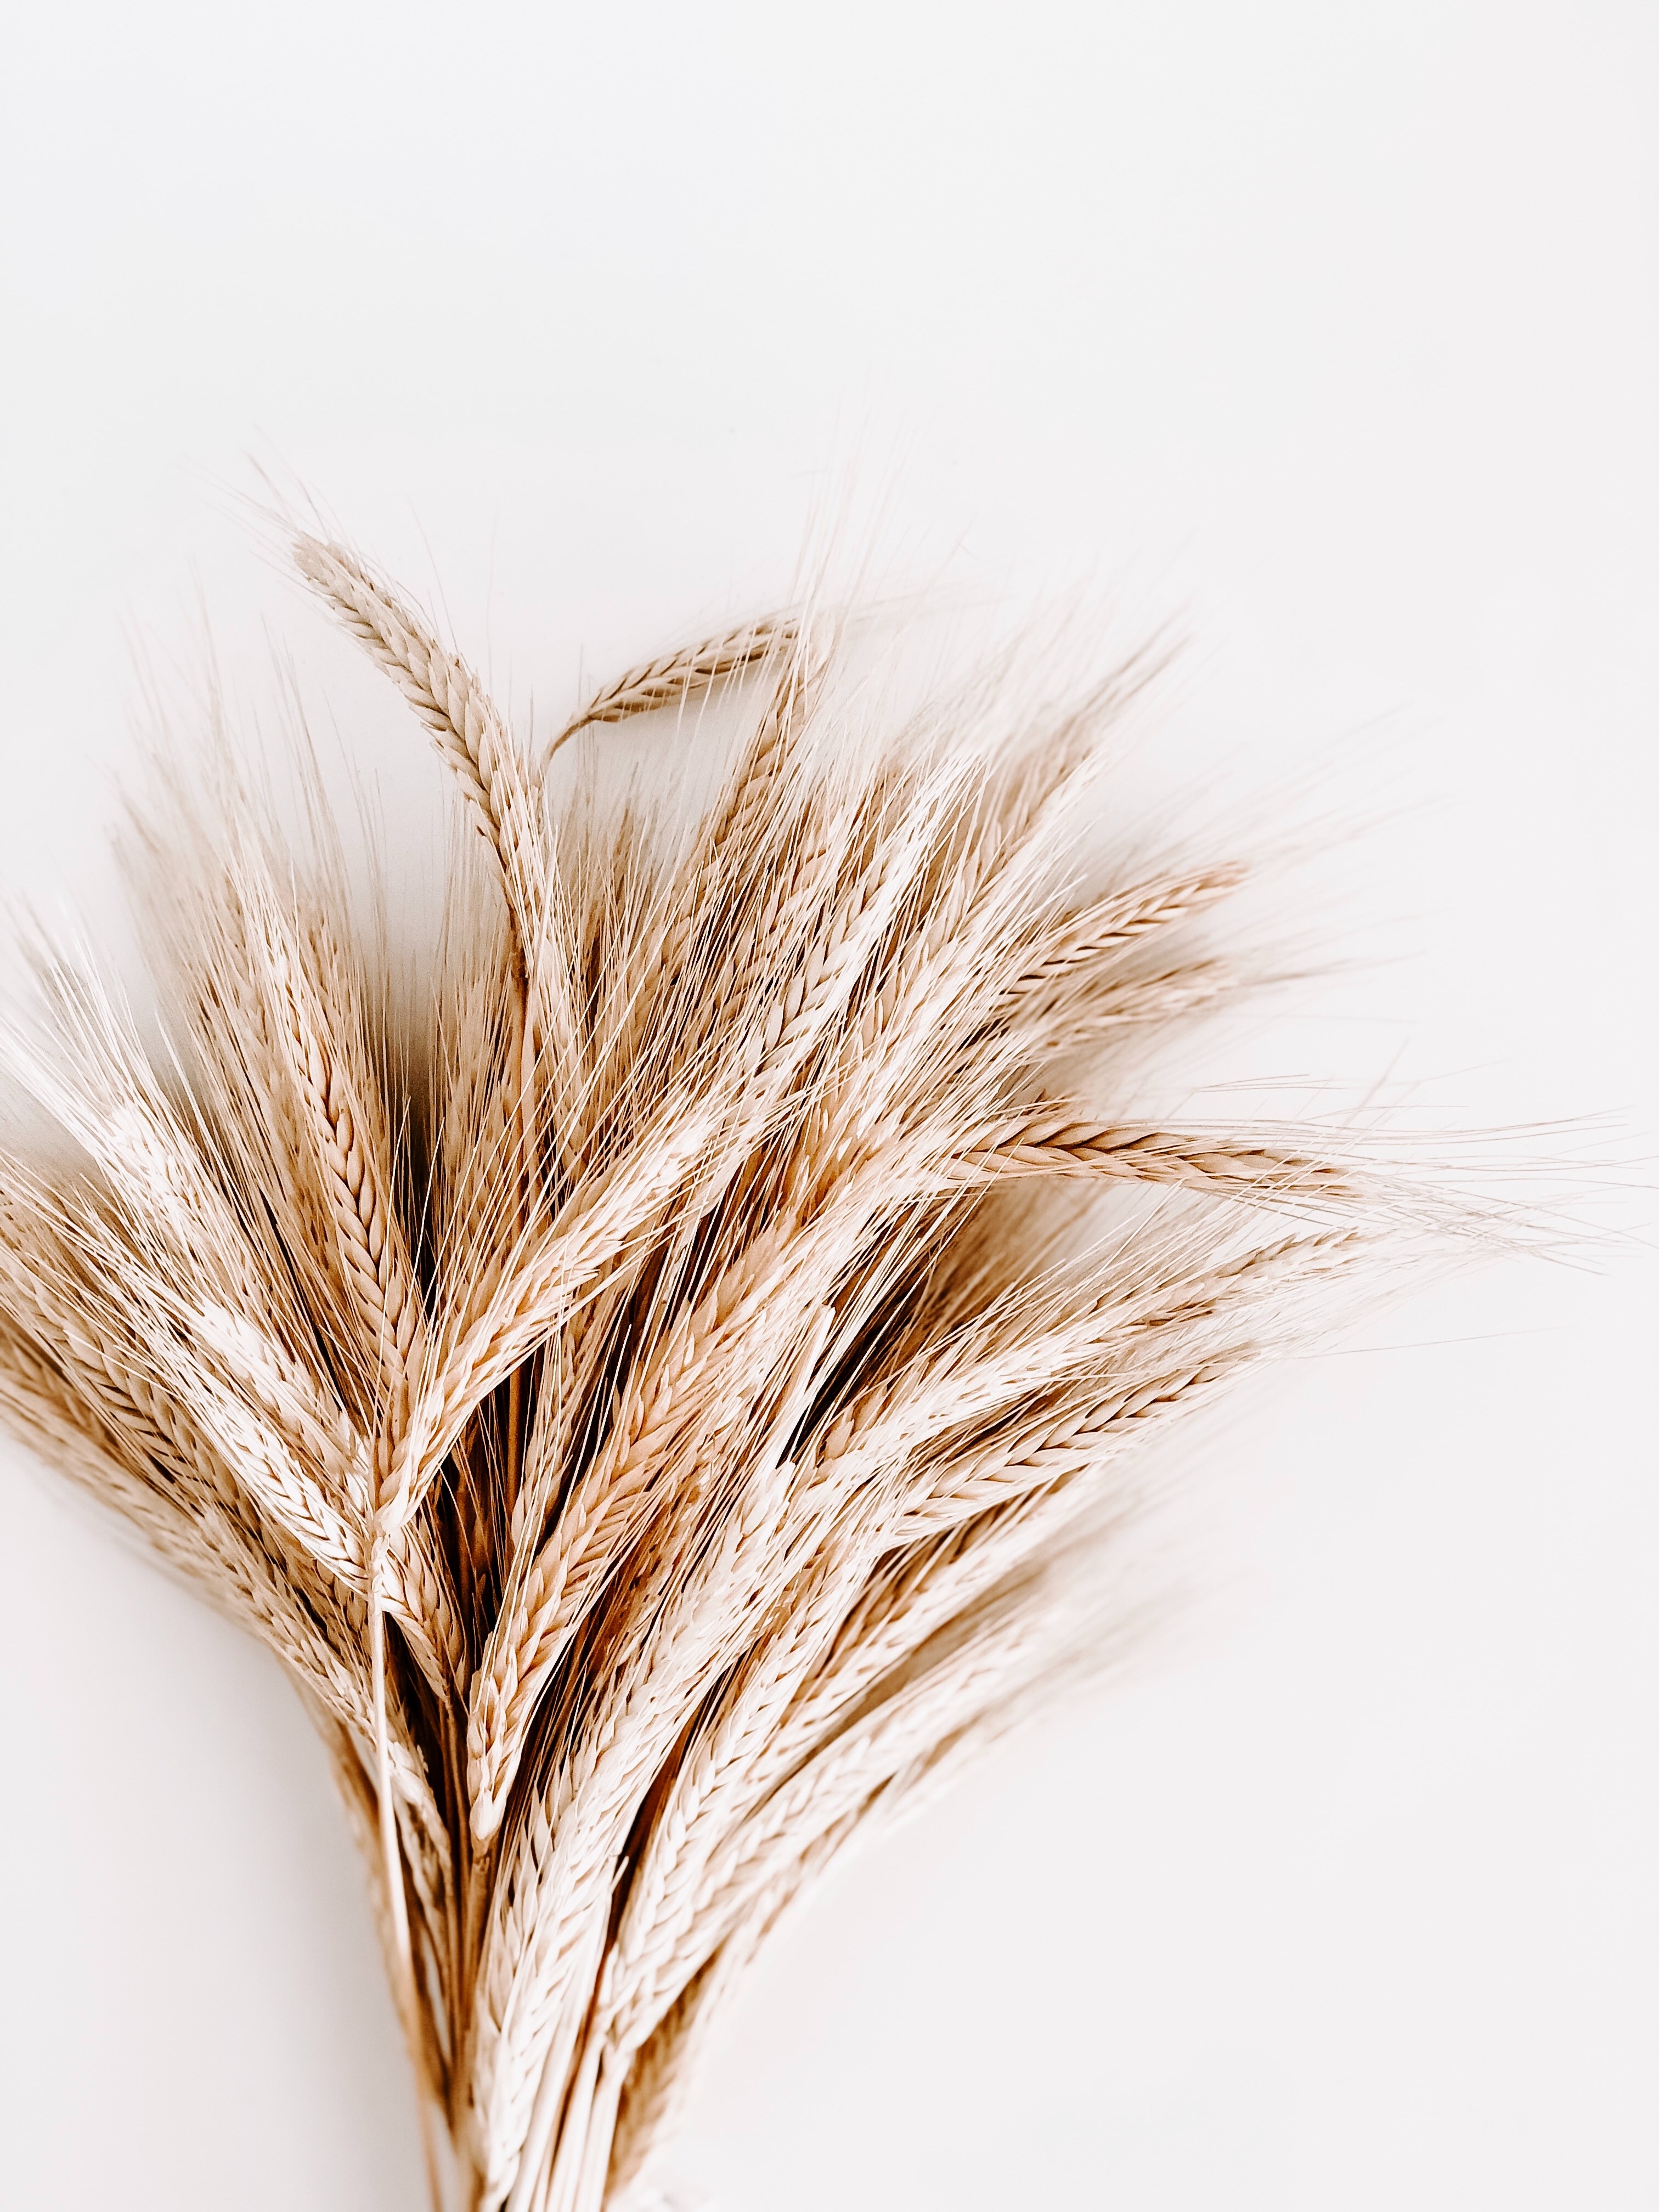 An armful of wheat ears on a white background